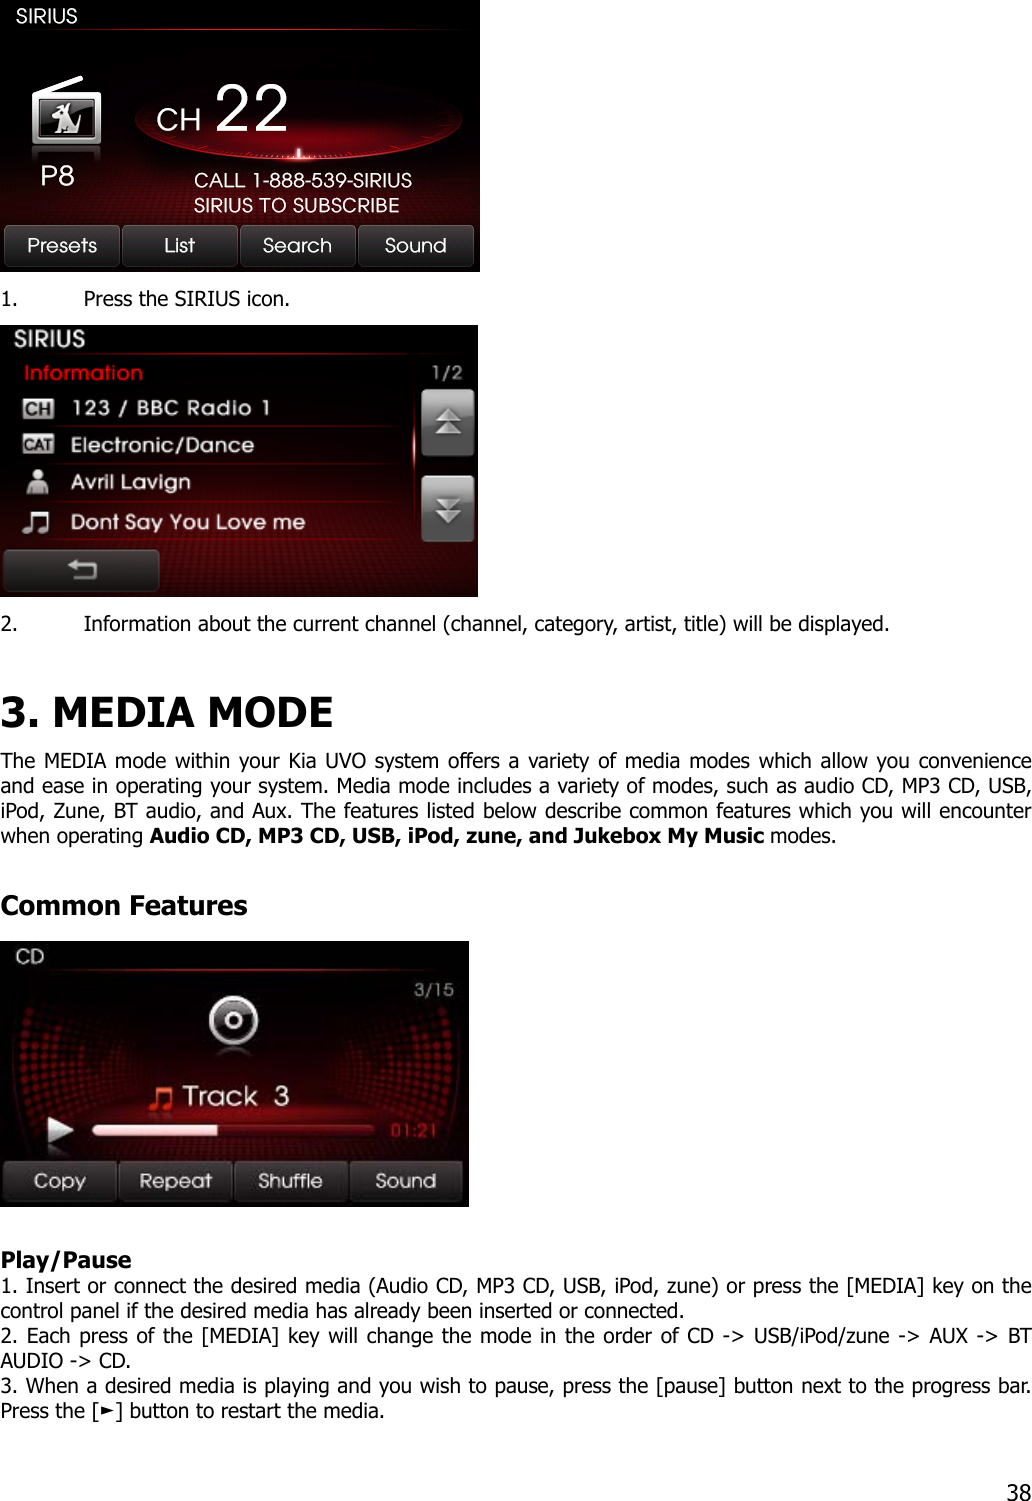  1. Press the SIRIUS icon.  2. Information about the current channel (channel, category, artist, title) will be displayed.  3. MEDIA MODE   The MEDIA mode within your Kia UVO system offers a variety of media modes which allow you convenience and ease in operating your system. Media mode includes a variety of modes, such as audio CD, MP3 CD, USB, iPod, Zune, BT audio, and Aux. The features listed below describe common features which you will encounter when operating Audio CD, MP3 CD, USB, iPod, zune, and Jukebox My Music modes.  Common Features   Play/Pause 1. Insert or connect the desired media (Audio CD, MP3 CD, USB, iPod, zune) or press the [MEDIA] key on the control panel if the desired media has already been inserted or connected. 2. Each press of the [MEDIA] key will change the mode in the order of CD -&gt; USB/iPod/zune -&gt; AUX -&gt; BT AUDIO -&gt; CD. 3. When a desired media is playing and you wish to pause, press the [pause] button next to the progress bar. Press the [ ] button to ►restart the media.   38